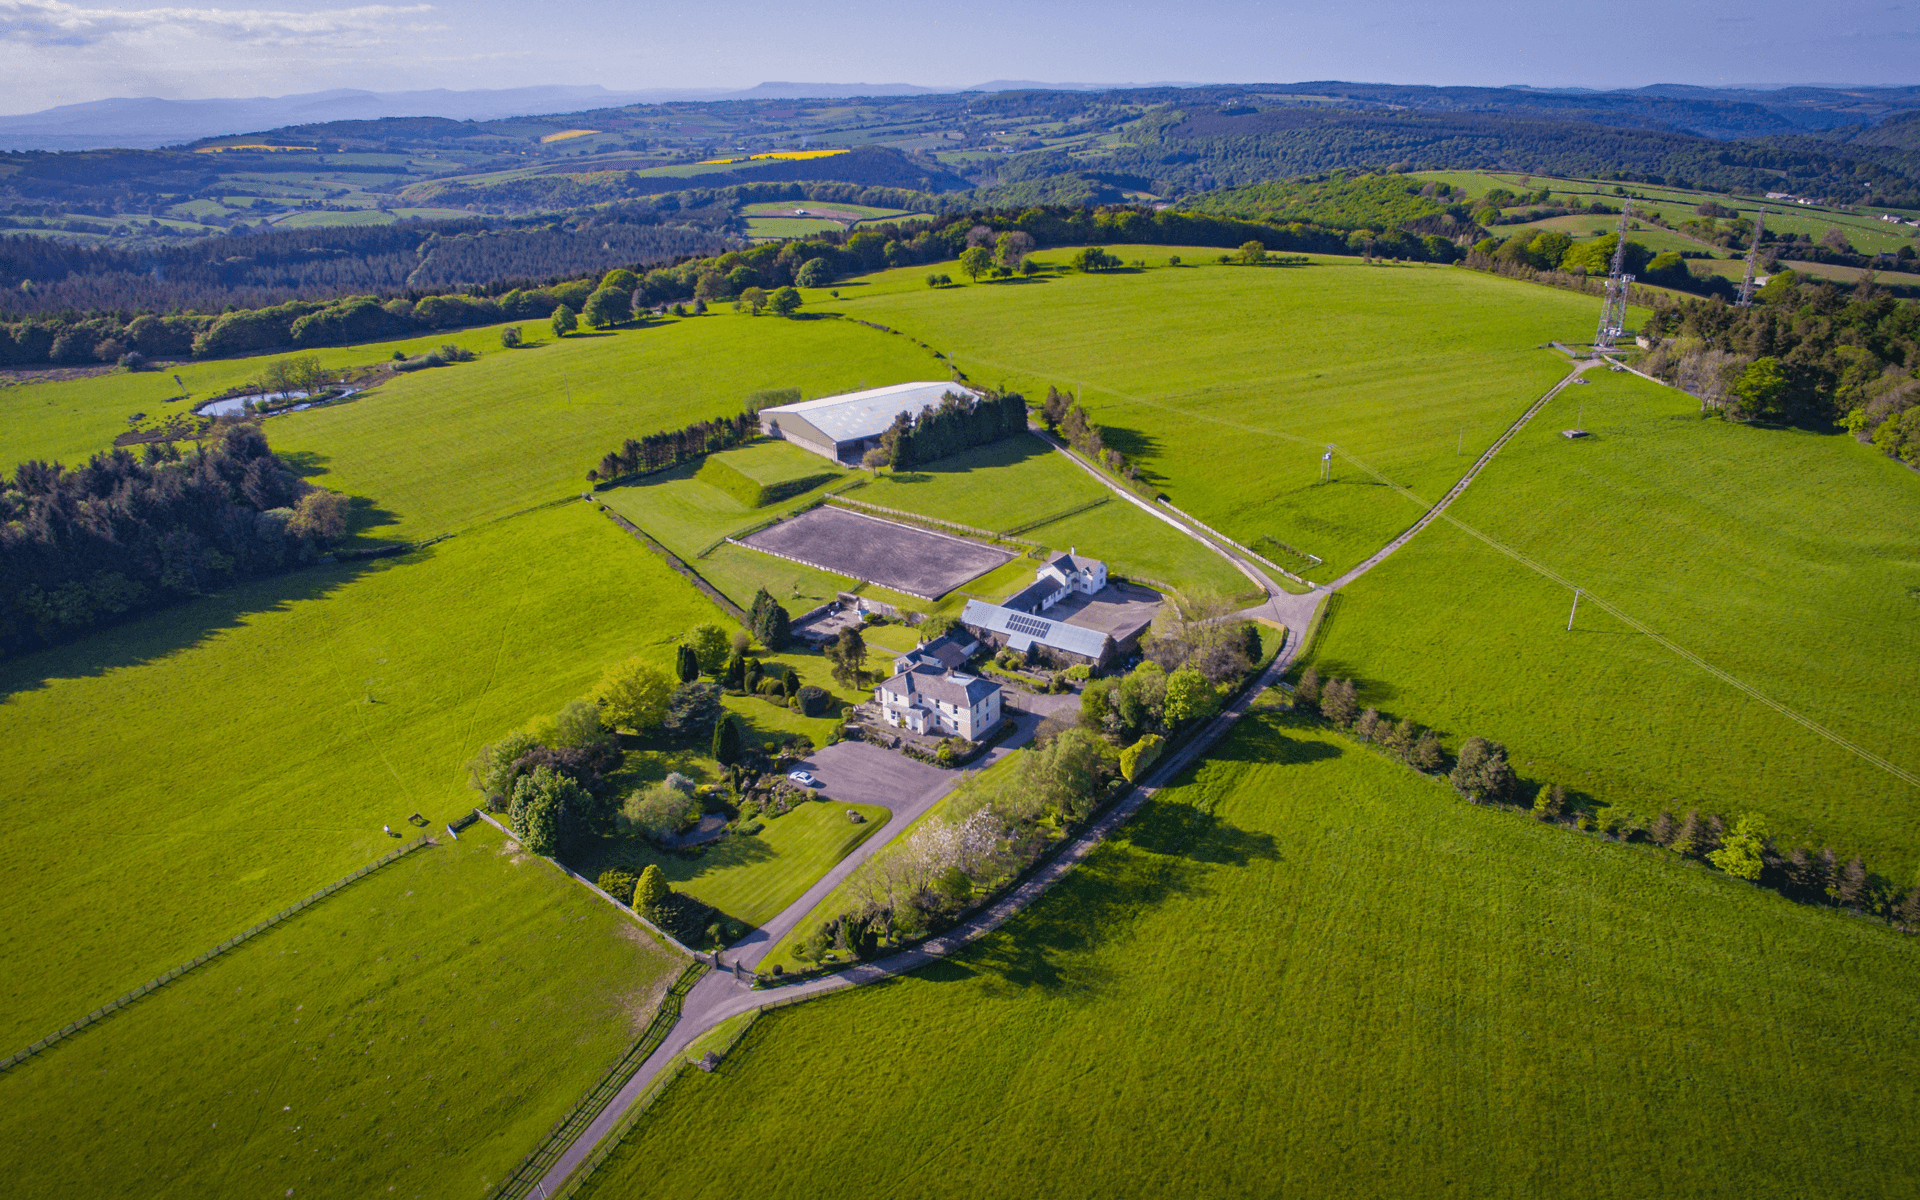 "DJI Inspire 1" aerial drone photo of Gaer Hill Farm in Chepstow, Wales